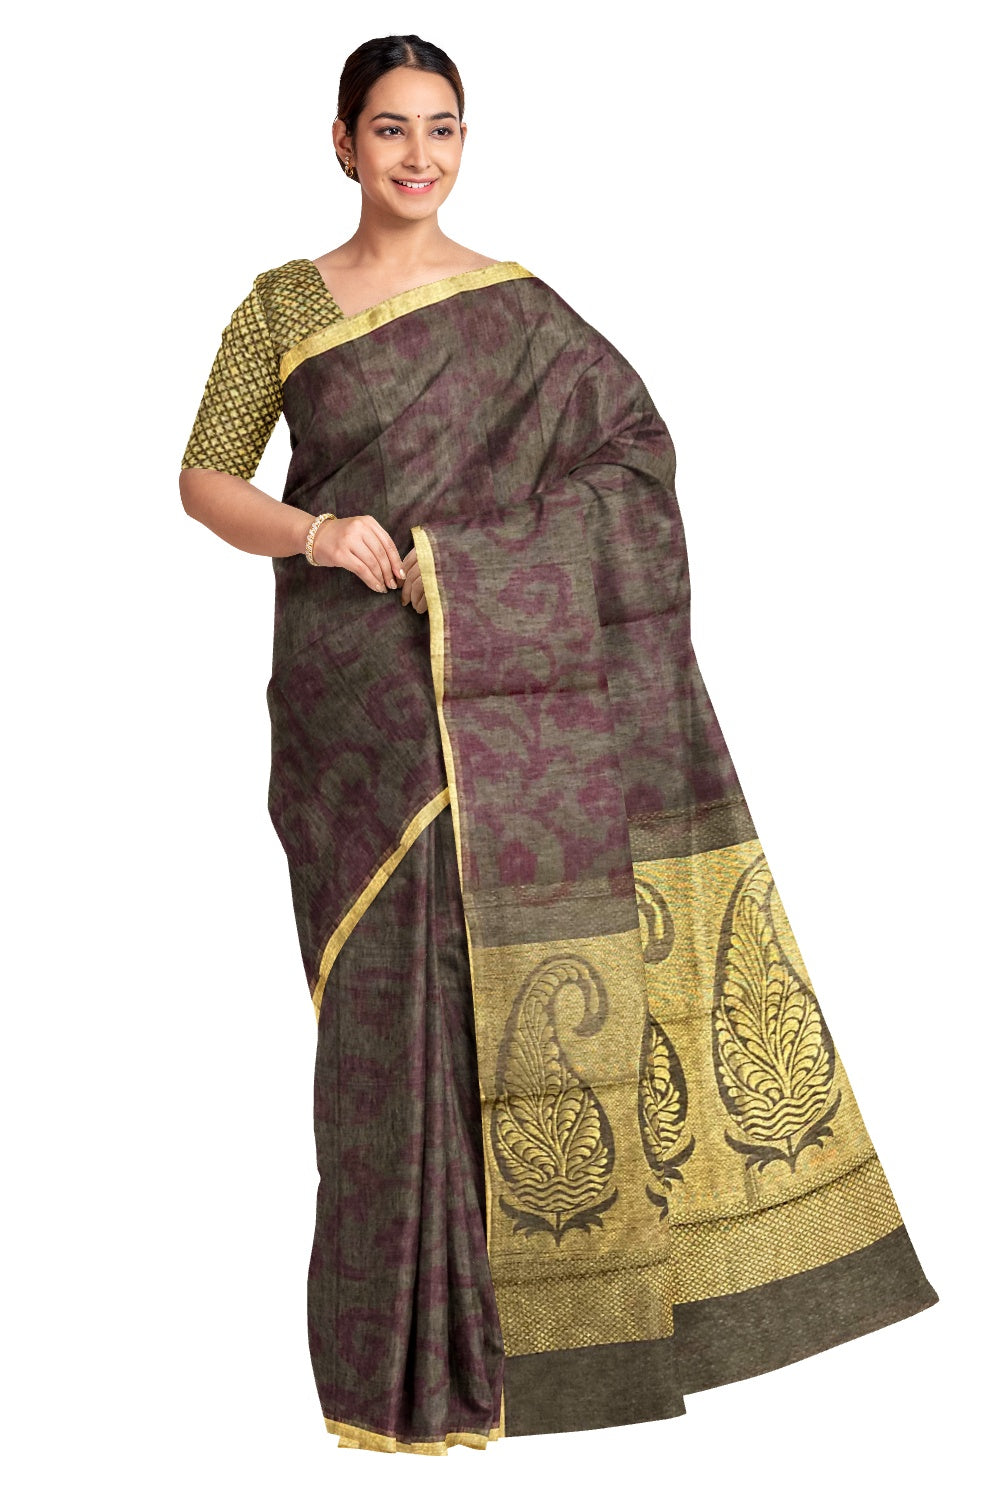 Southloom Sico Gadwal Semi Silk Saree in Purple with Beige Paisley Motifs (Blouse Piece with Work)